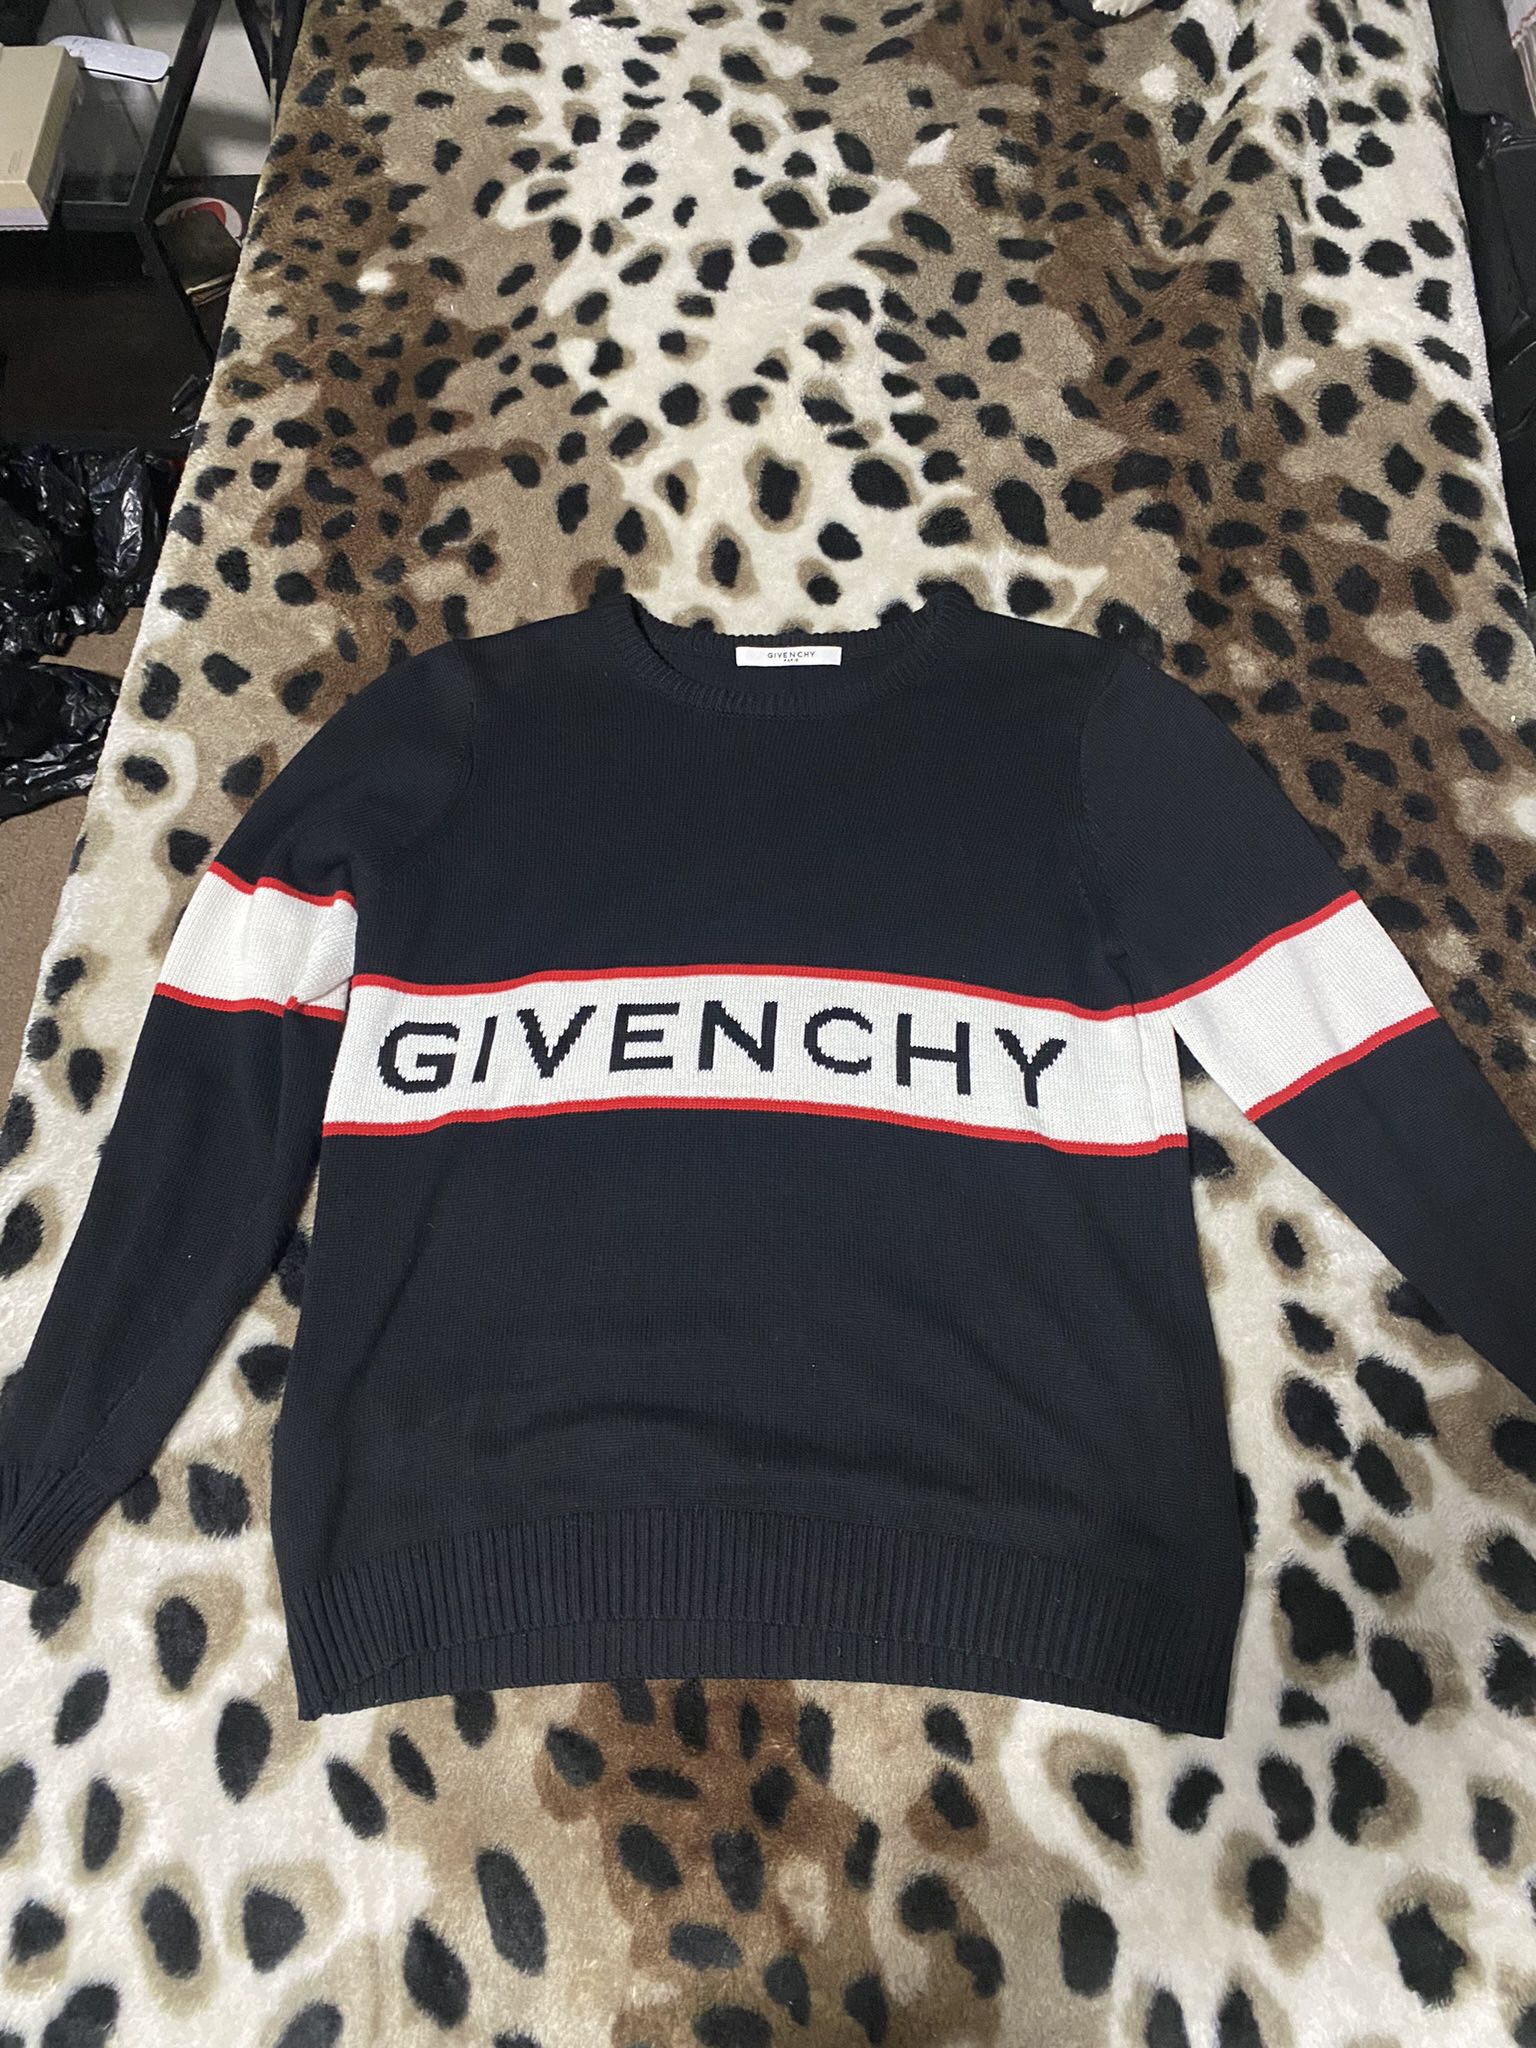 Monetair speler ik wil Givenchy wool jumper sweater 100% Authentic for Sale in Lake Elsinore, CA -  OfferUp